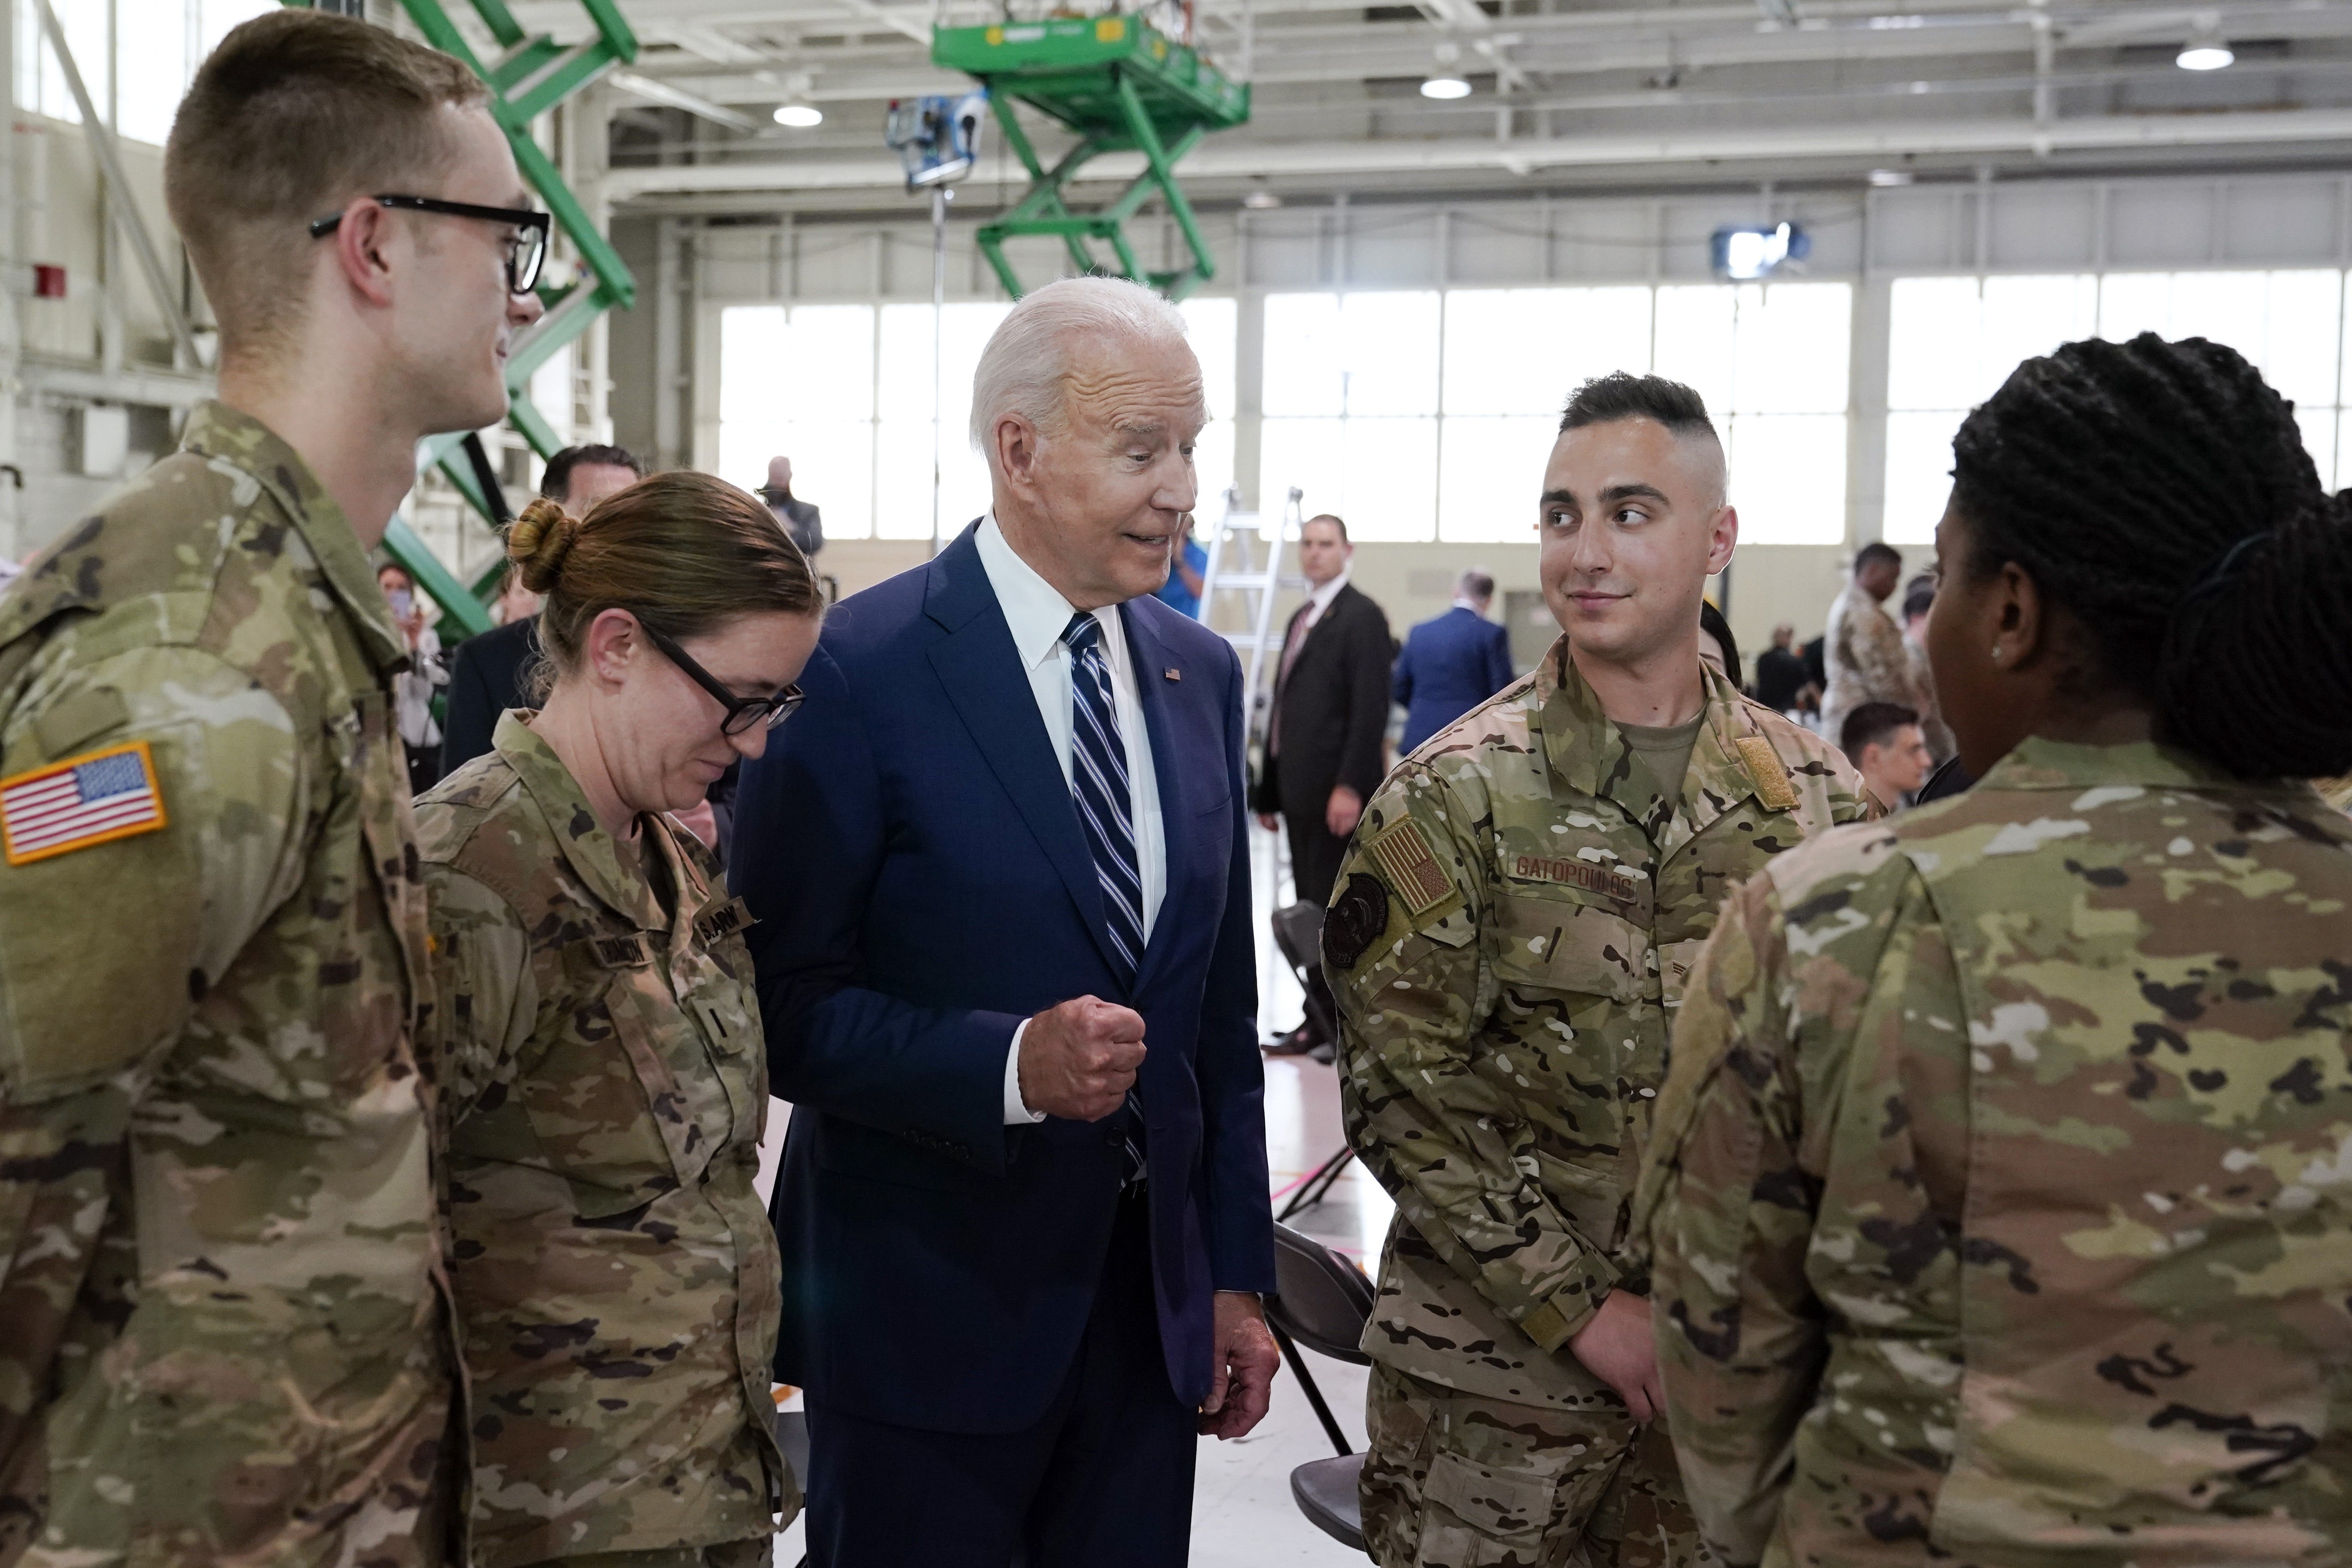 Biden visits troops to offer Memorial Day thanks: 'You are the spine of America'